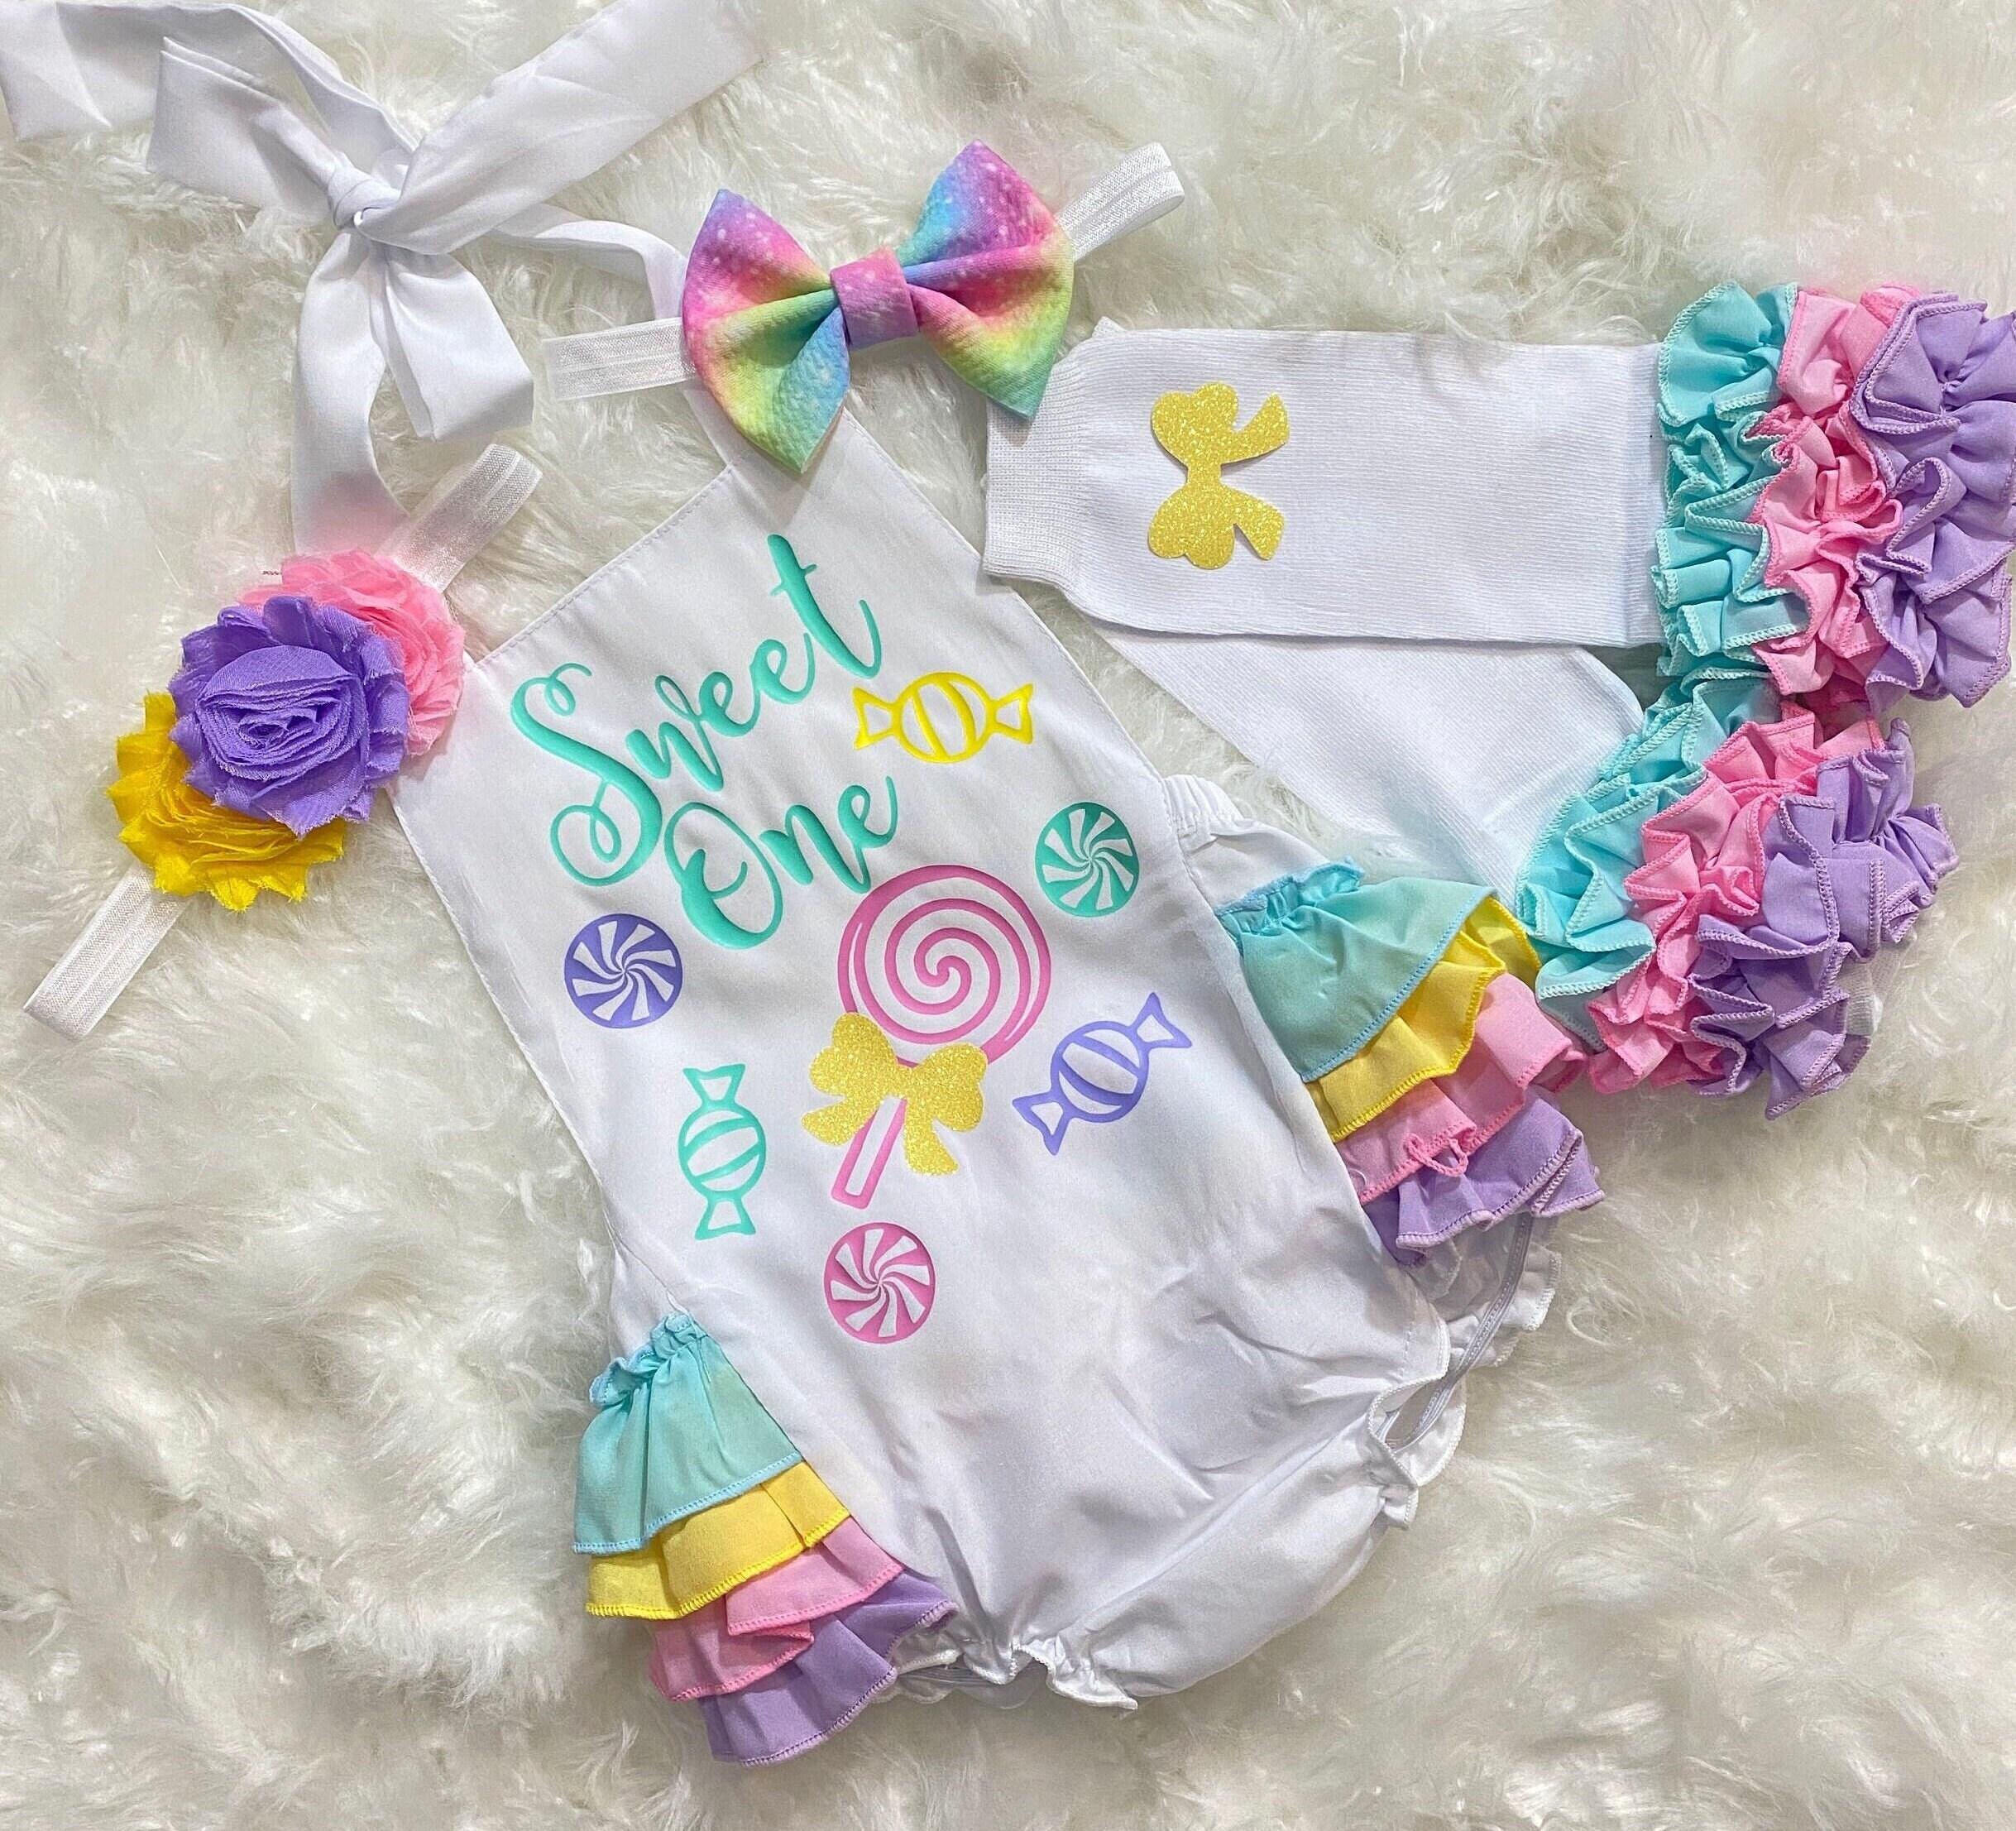 Candy Birthday Outfit, Candy Headband Set, Sweet One Birthday 